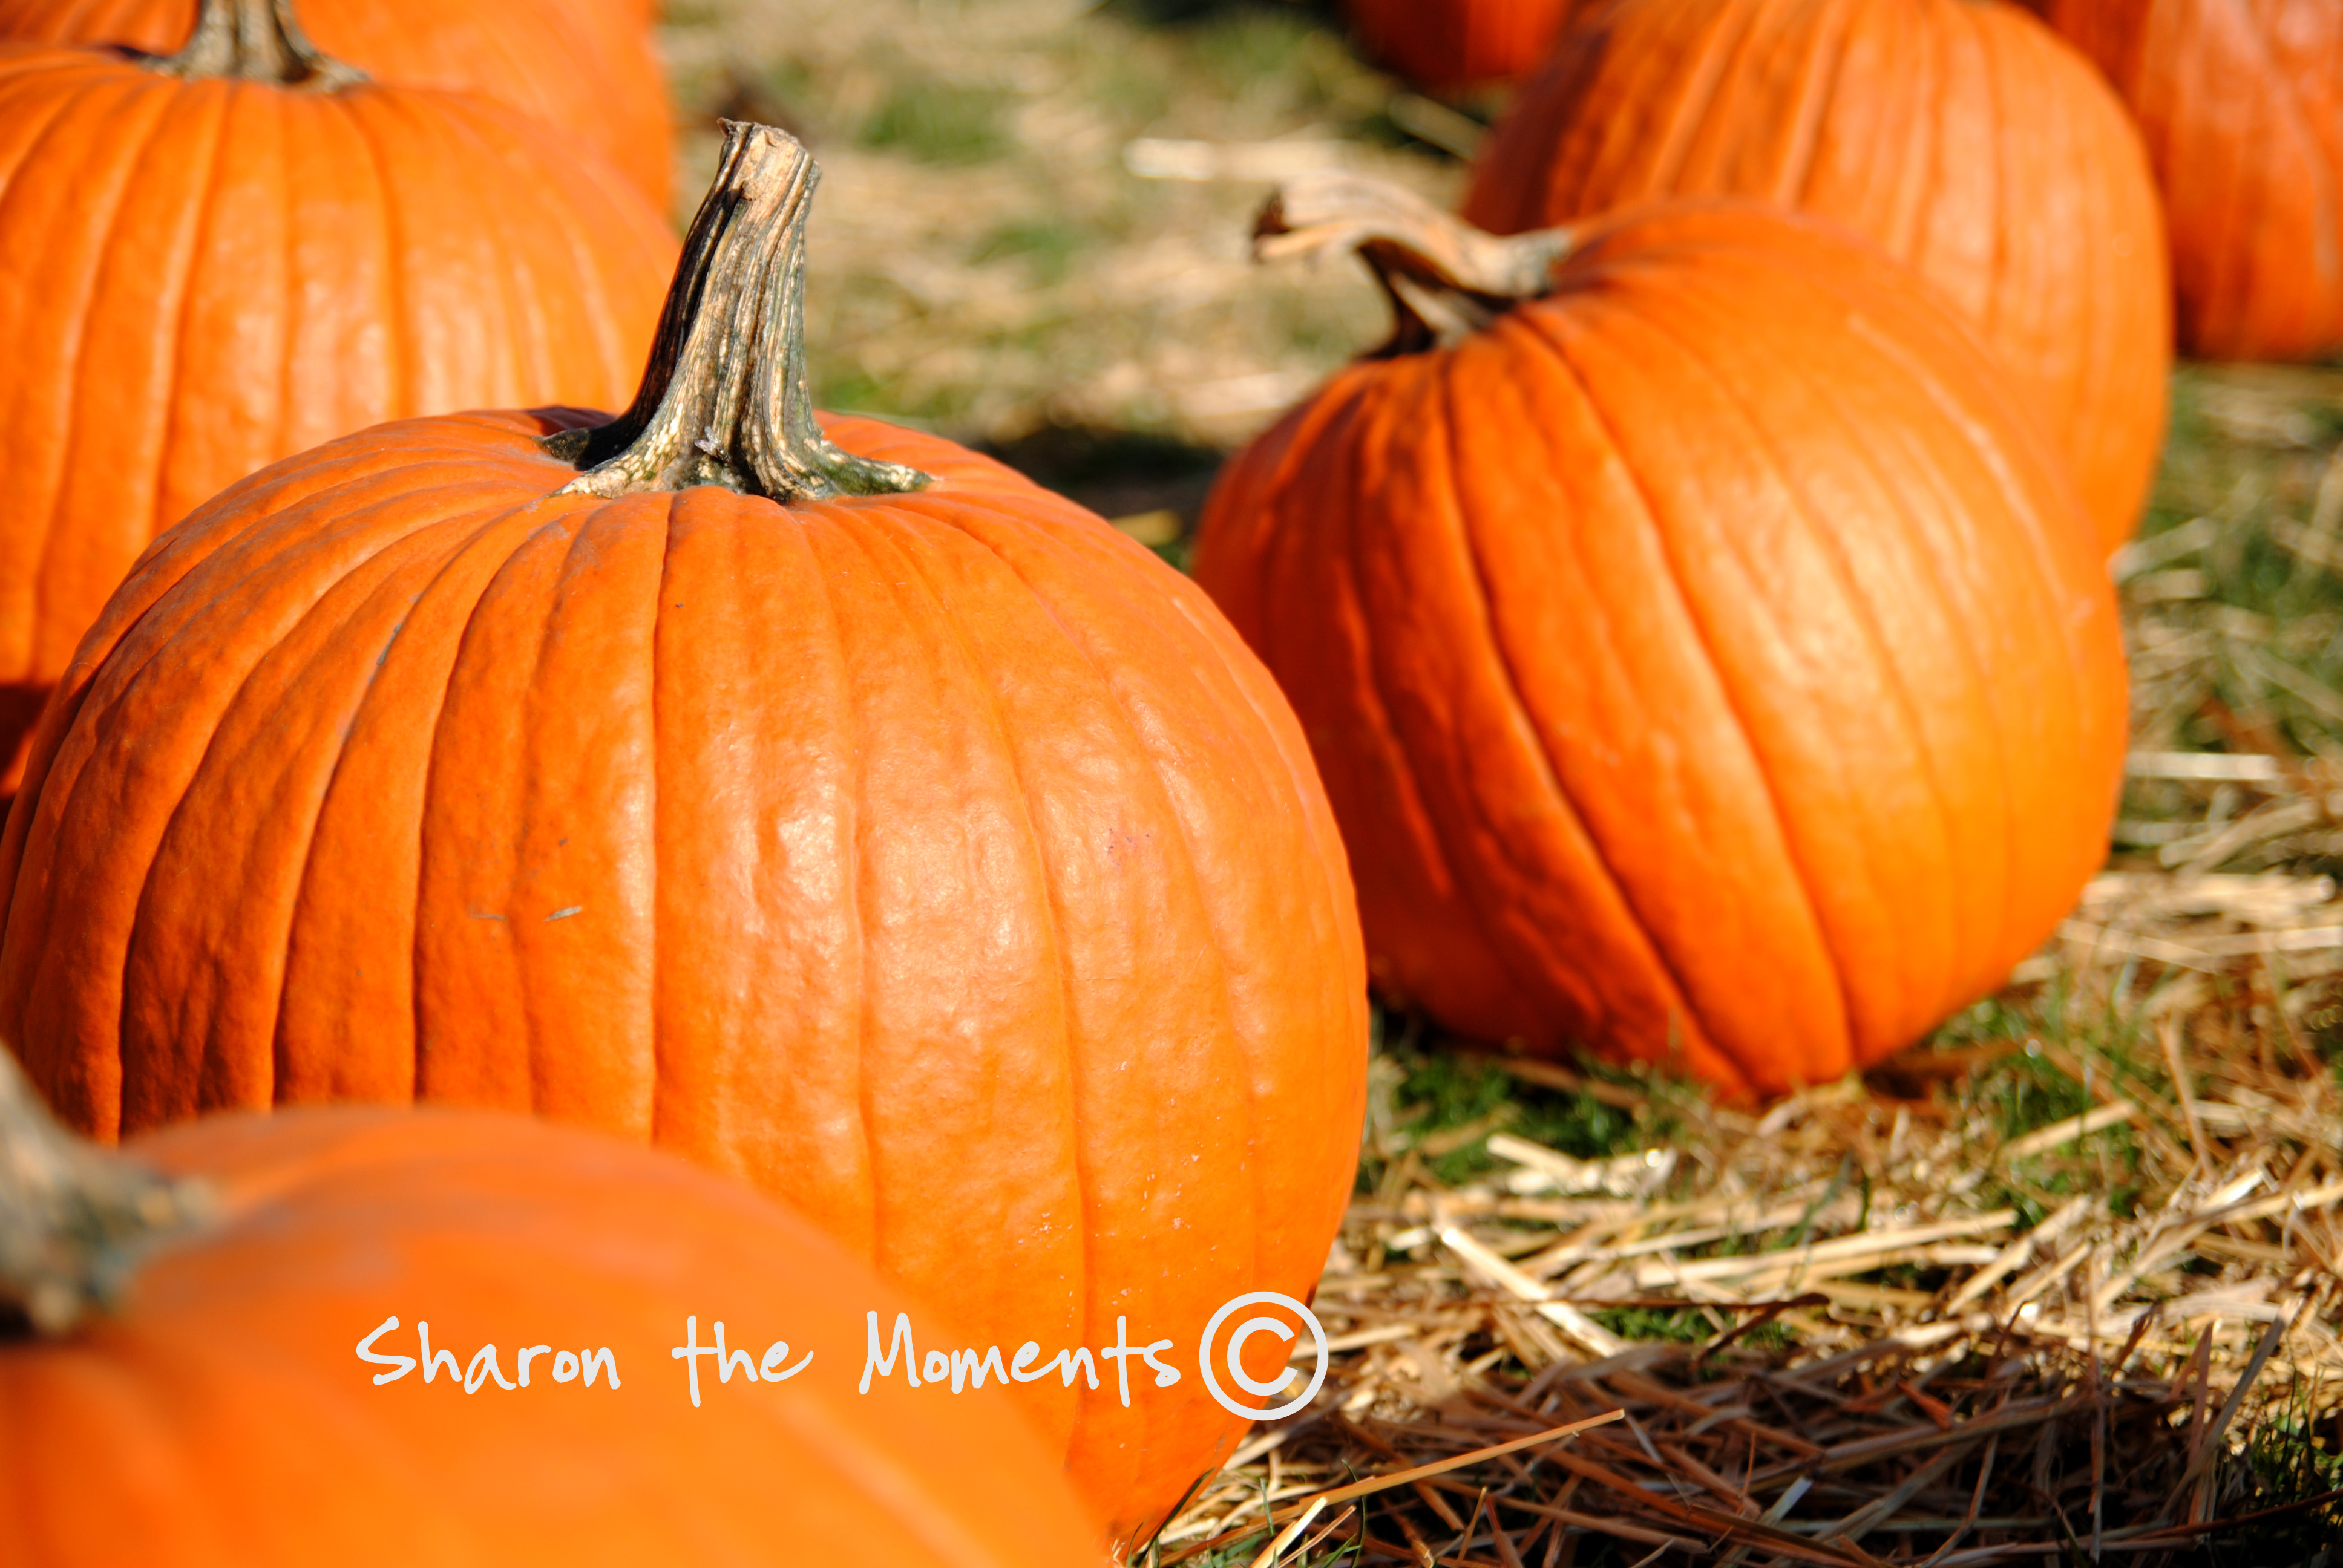 Favorite Photo Friday ™ … Love all things Pumpkins